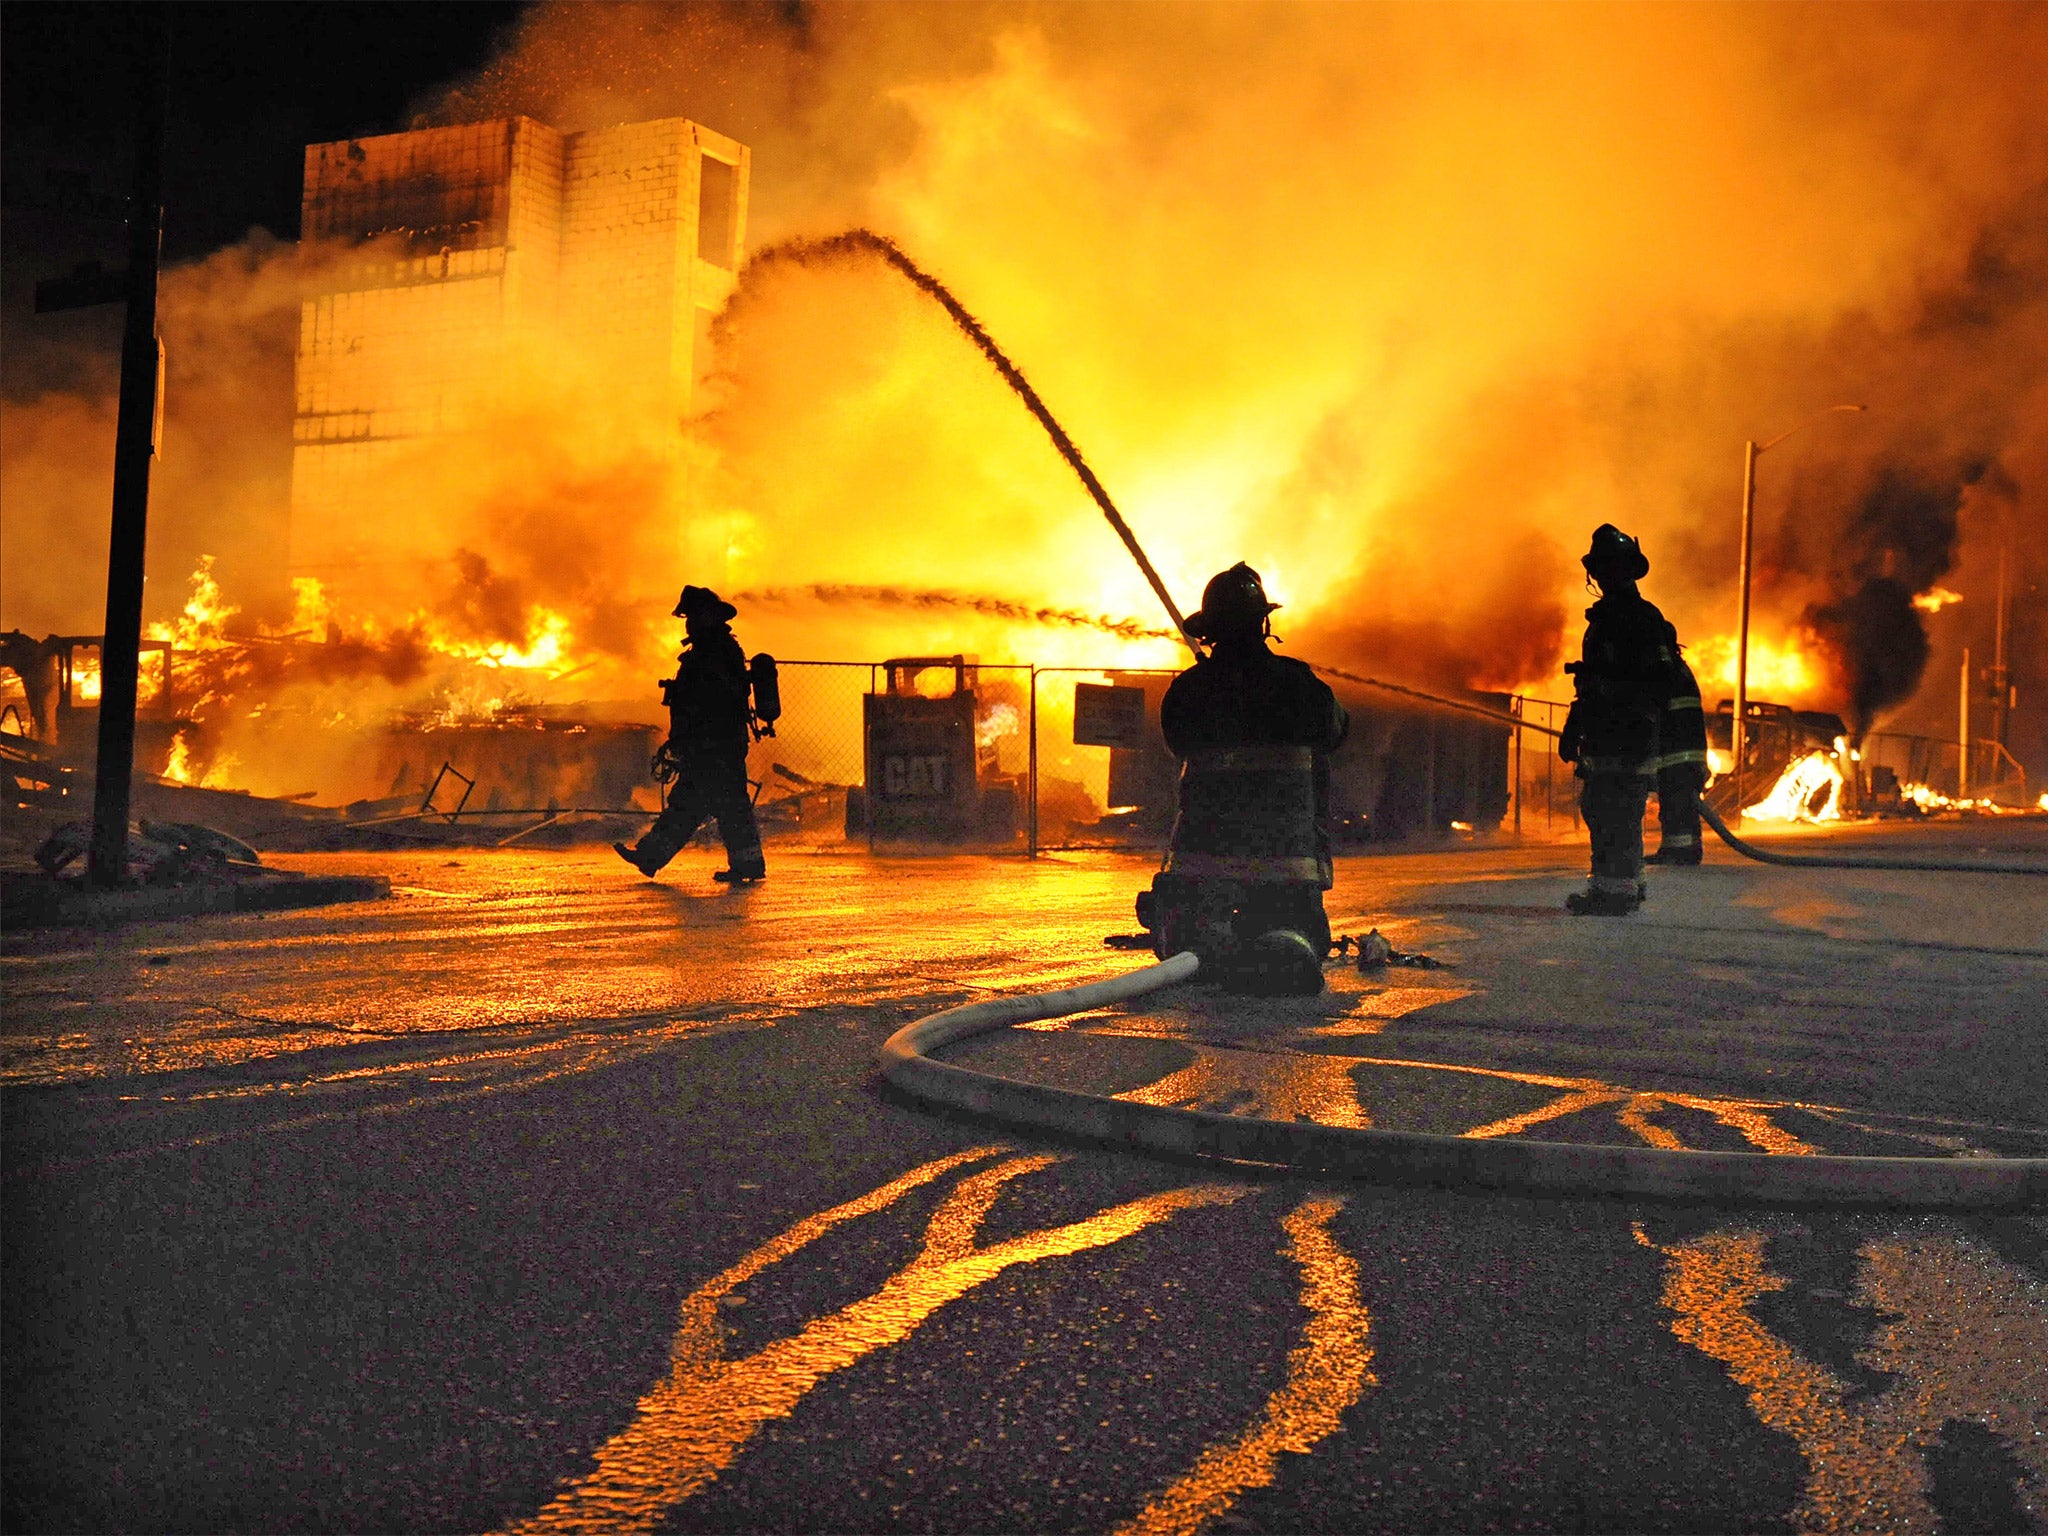 Firefighters battling a blaze at a building site on Monday in east Baltimore